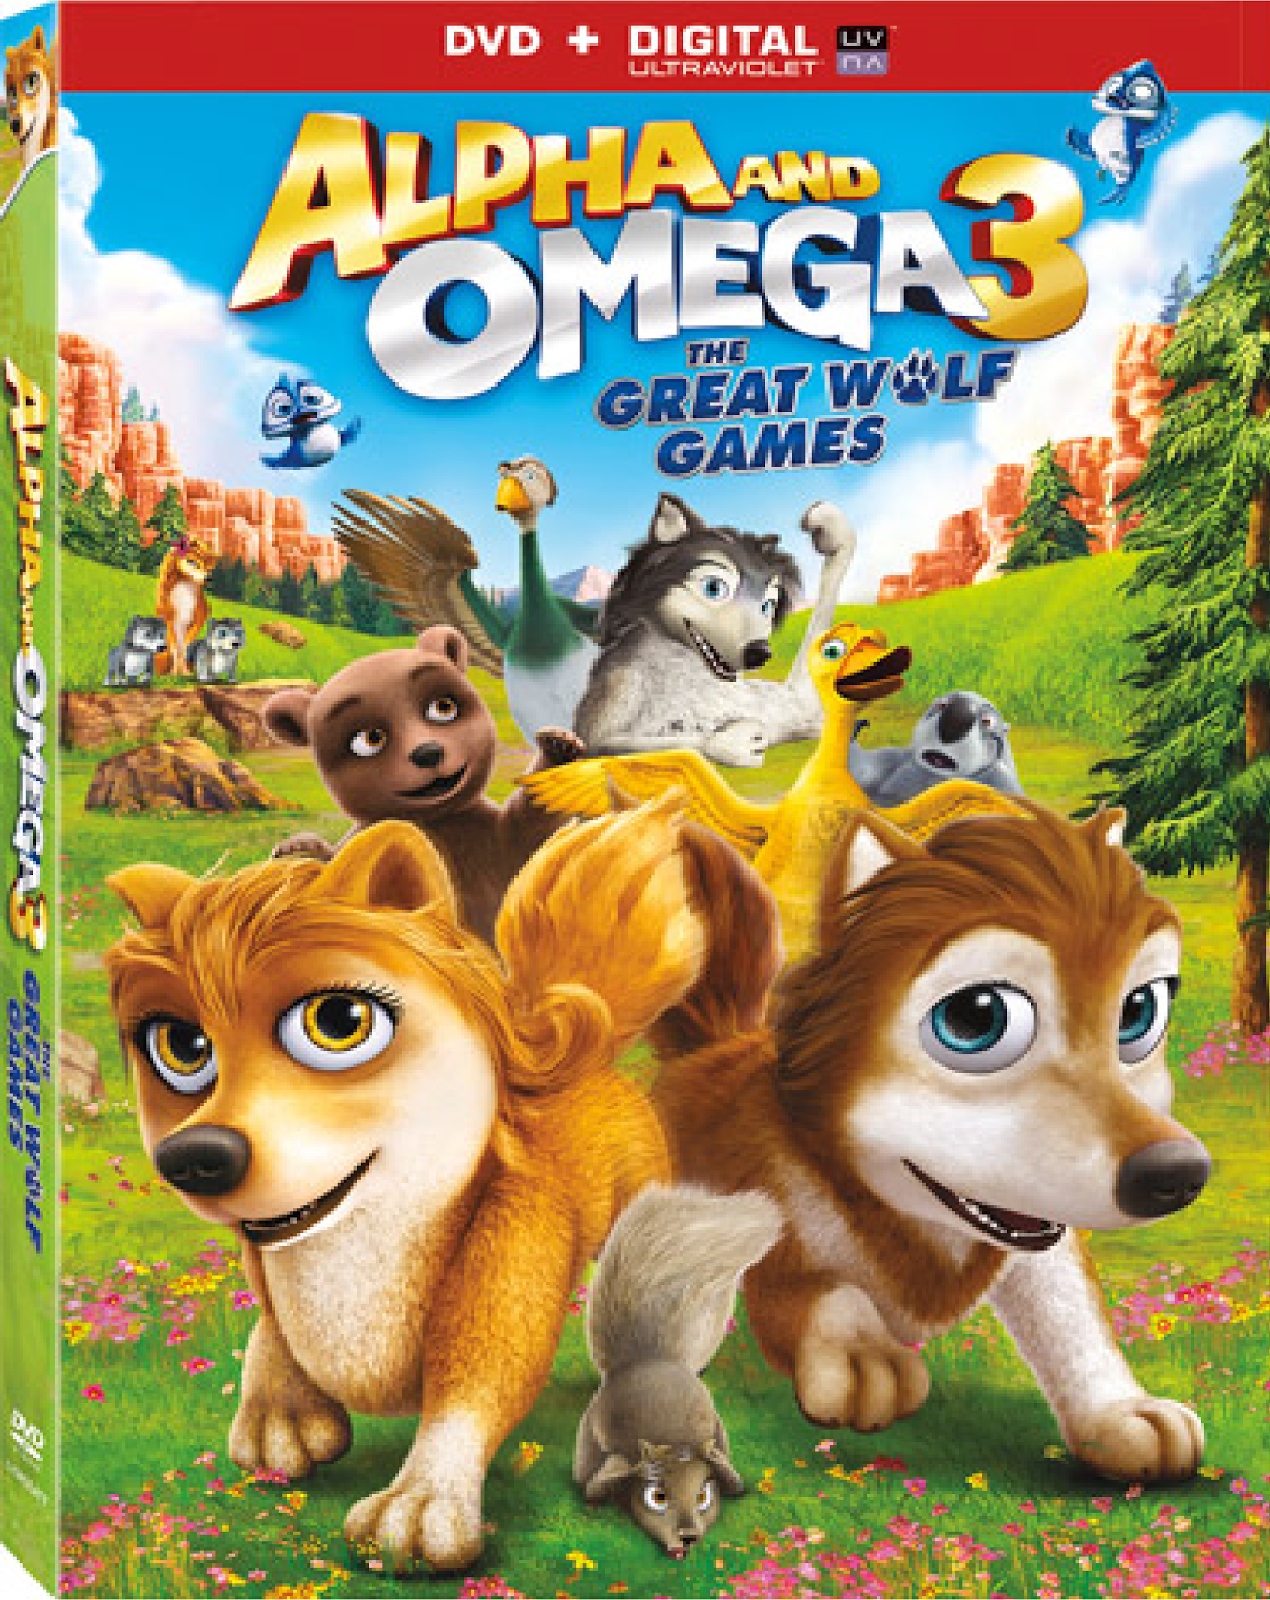 Alpha and Omega 3 - The Great Wolf Games (2014)